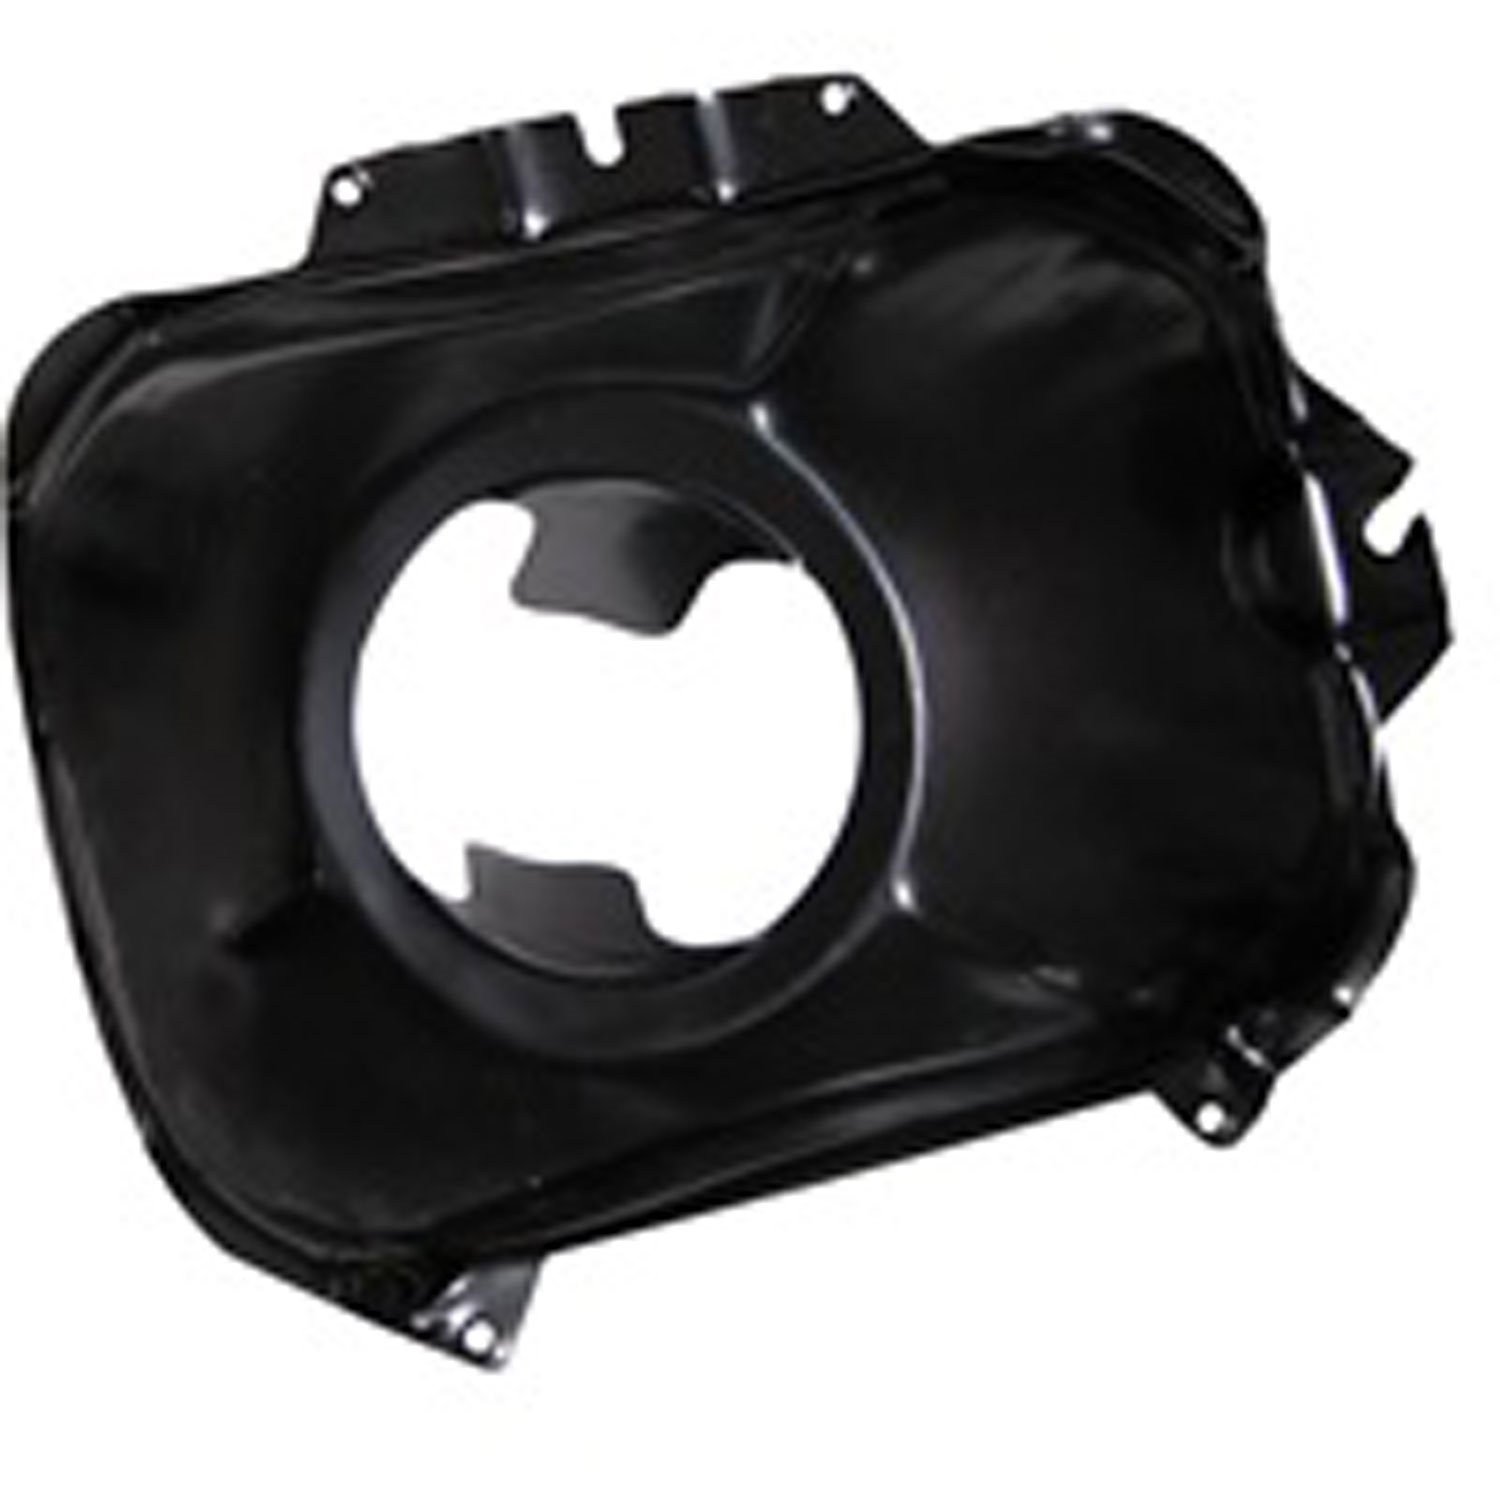 Replacement headlight housing, Fits right side on 84-96 Jeep Cherokee XJ and 87-95 Wrangler